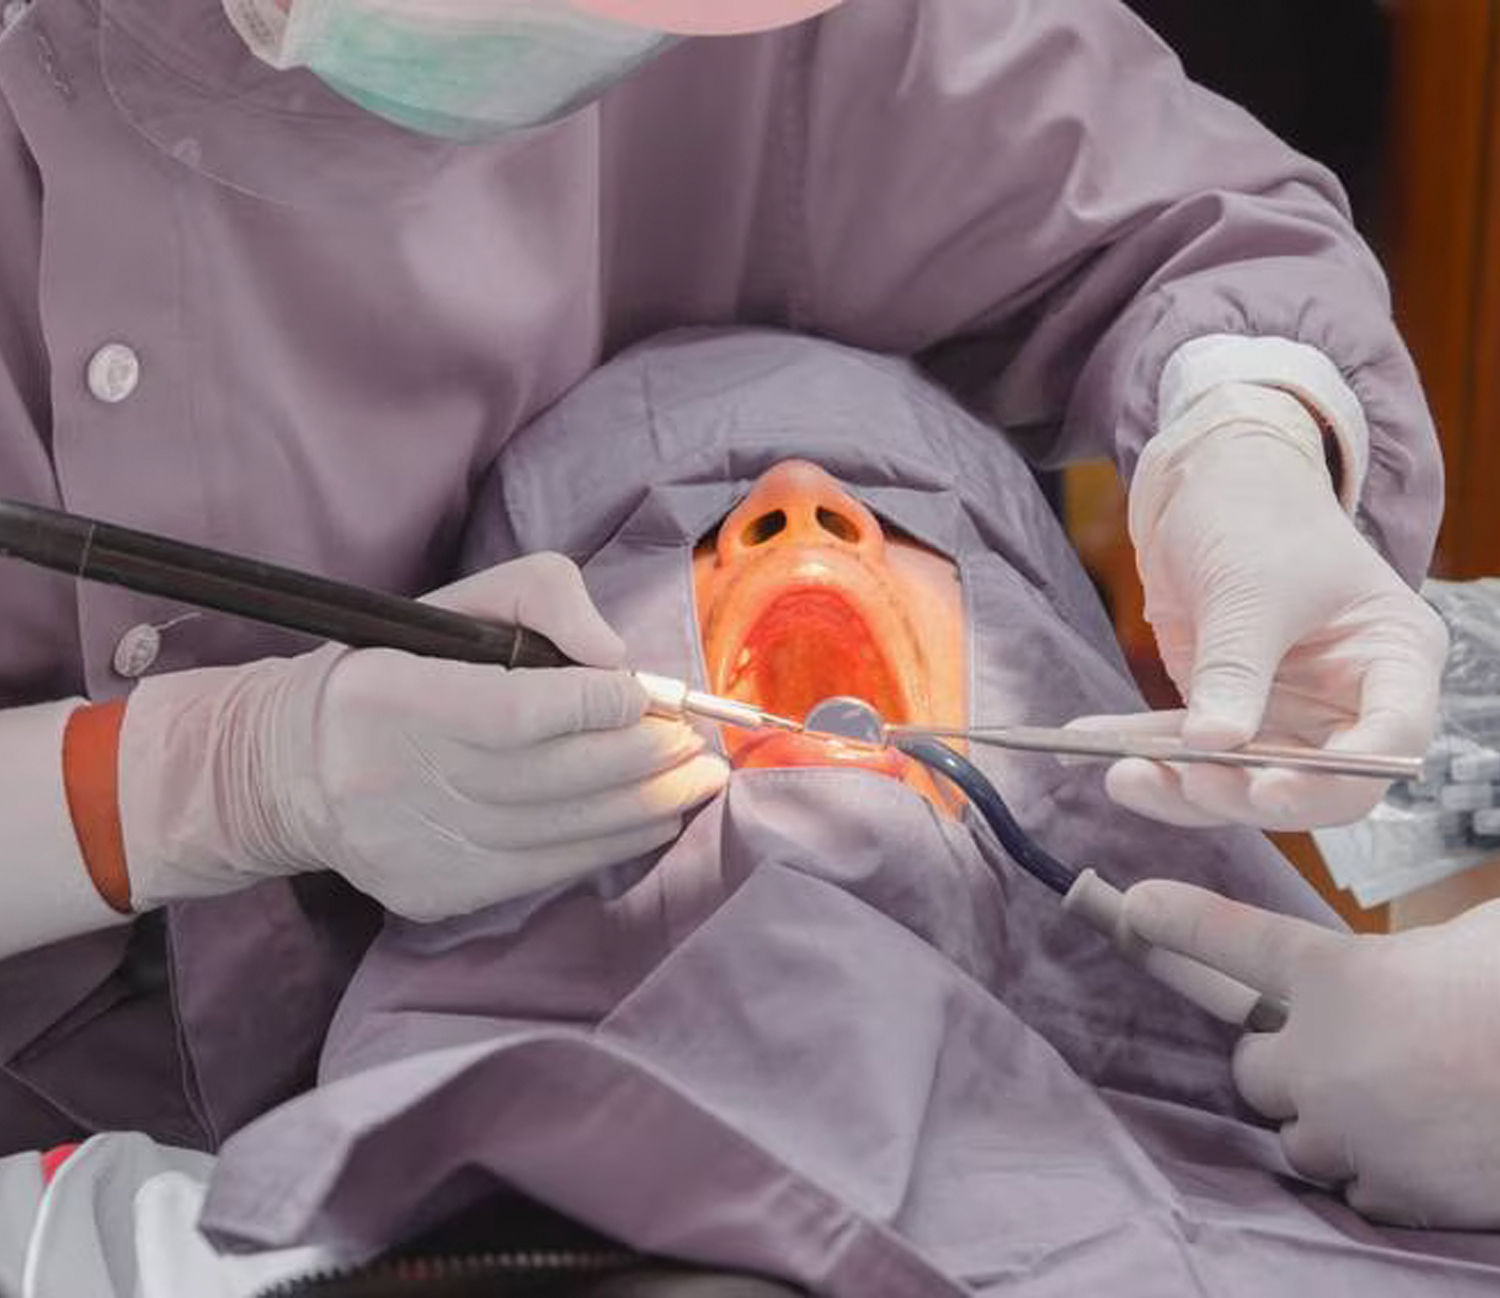 Dentist conducting a procedure on a patient's mouth.